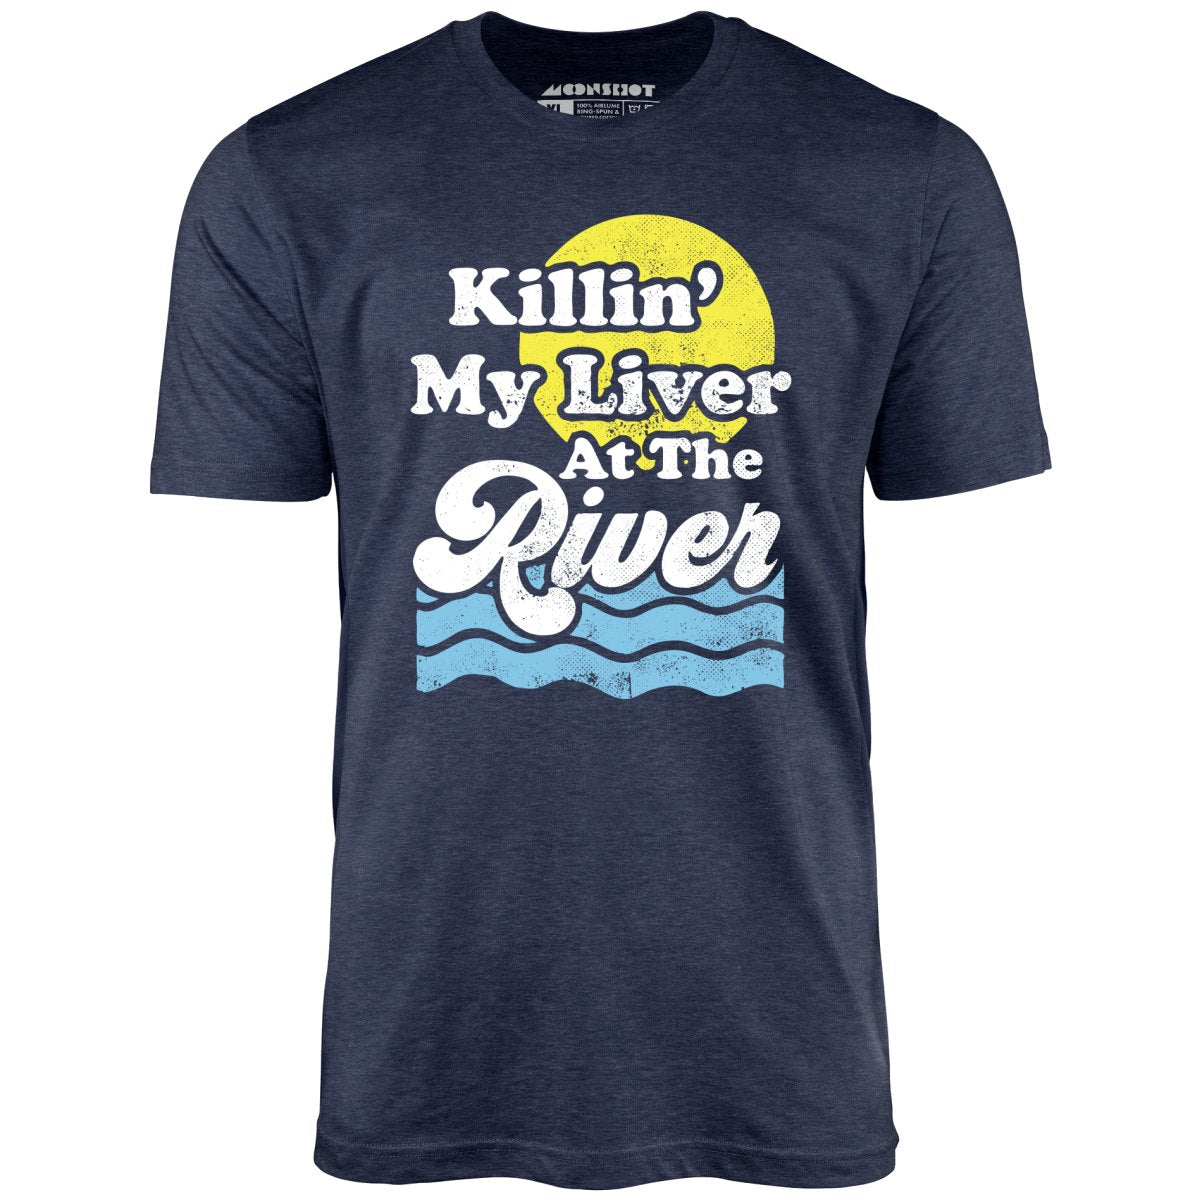 Killin' My Liver At The River - Unisex T-Shirt